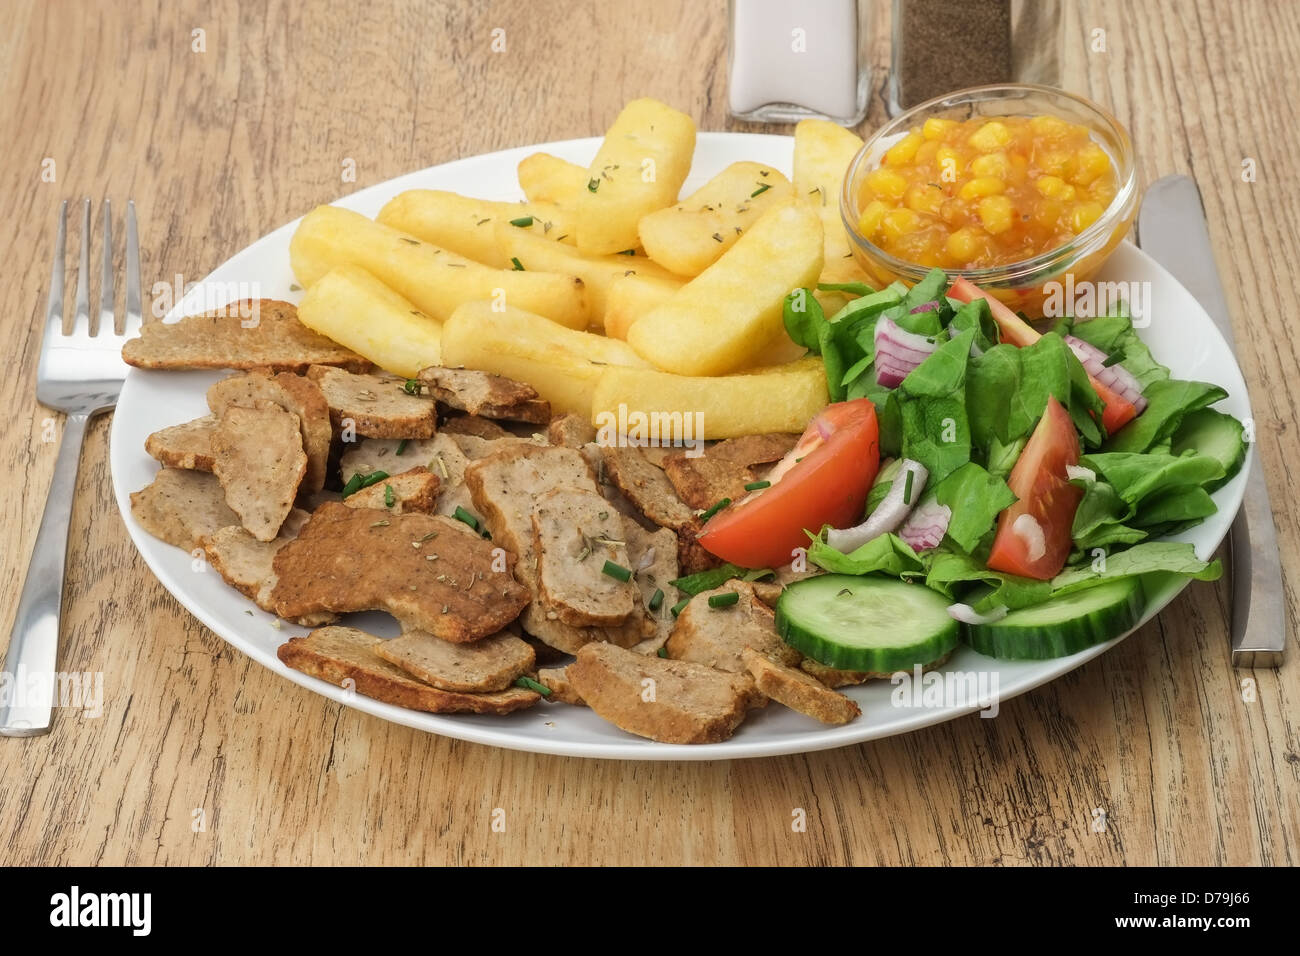 A dinner plate of slices of beef kebab gyros or shawarma meat with fries and salad Stock Photo